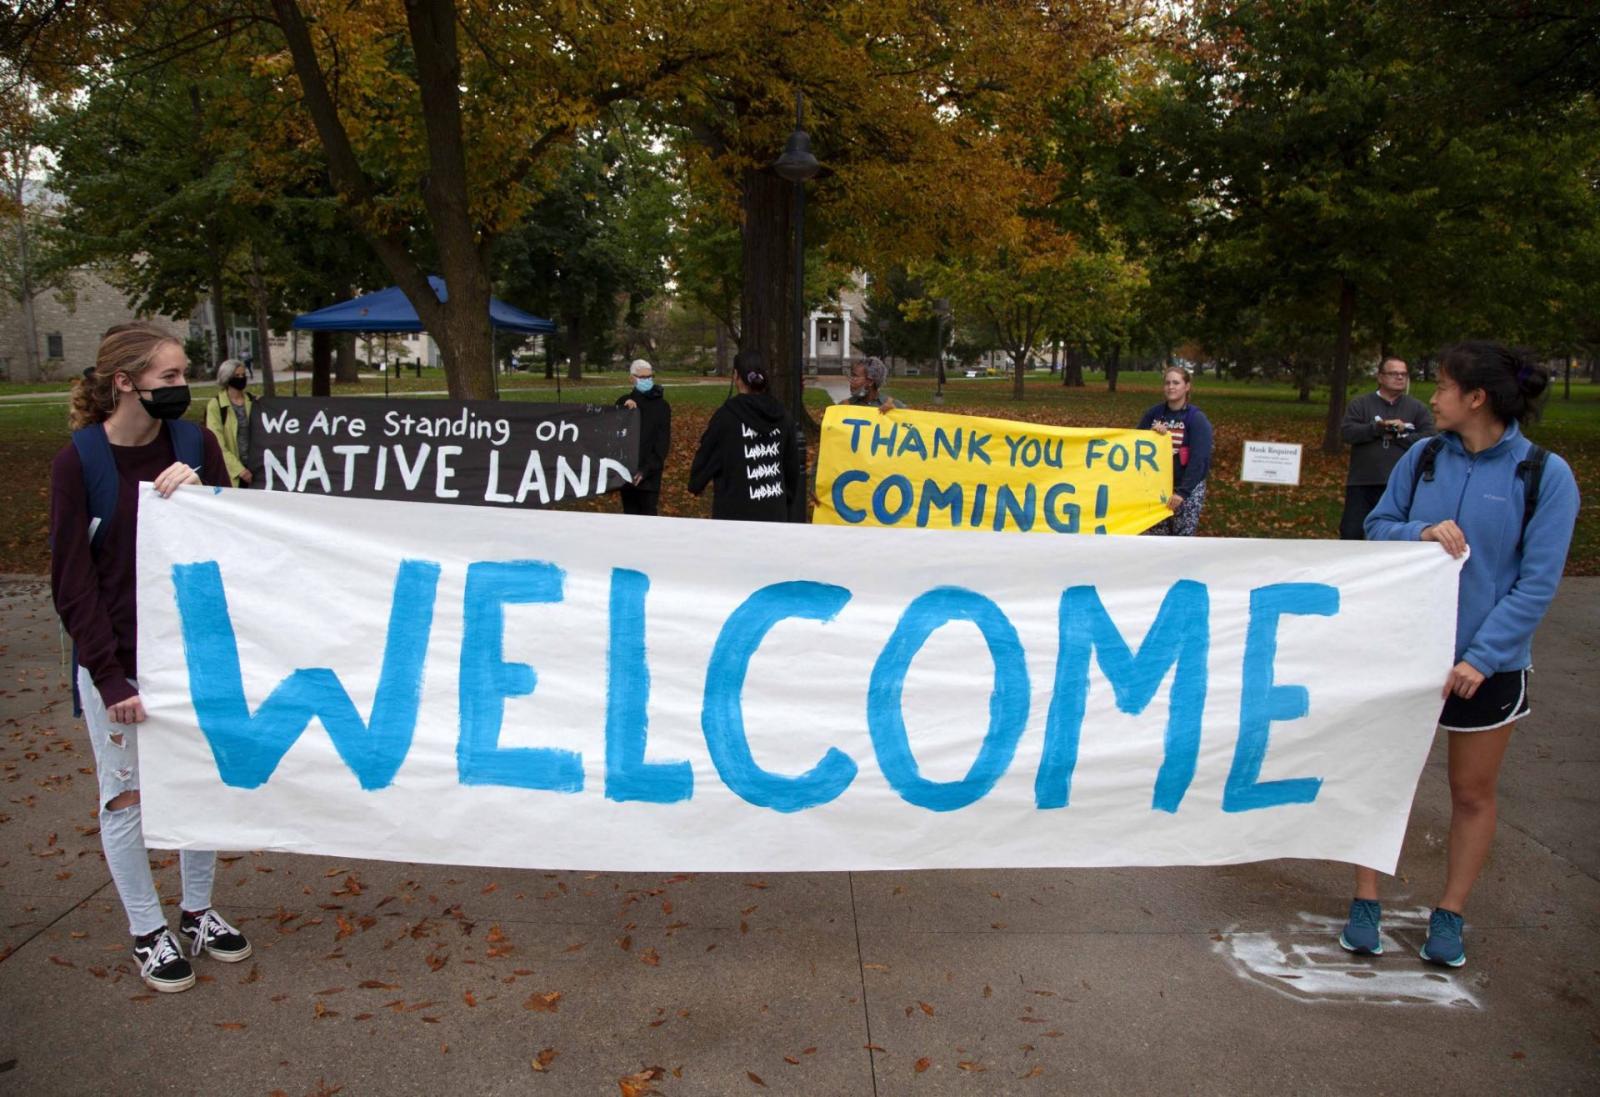 Students hold signs that say "welcome", "Thank you for coming!" and "we are standing on native land" during the university's 6th Annual Indigenous Peoples' Day Celebration.